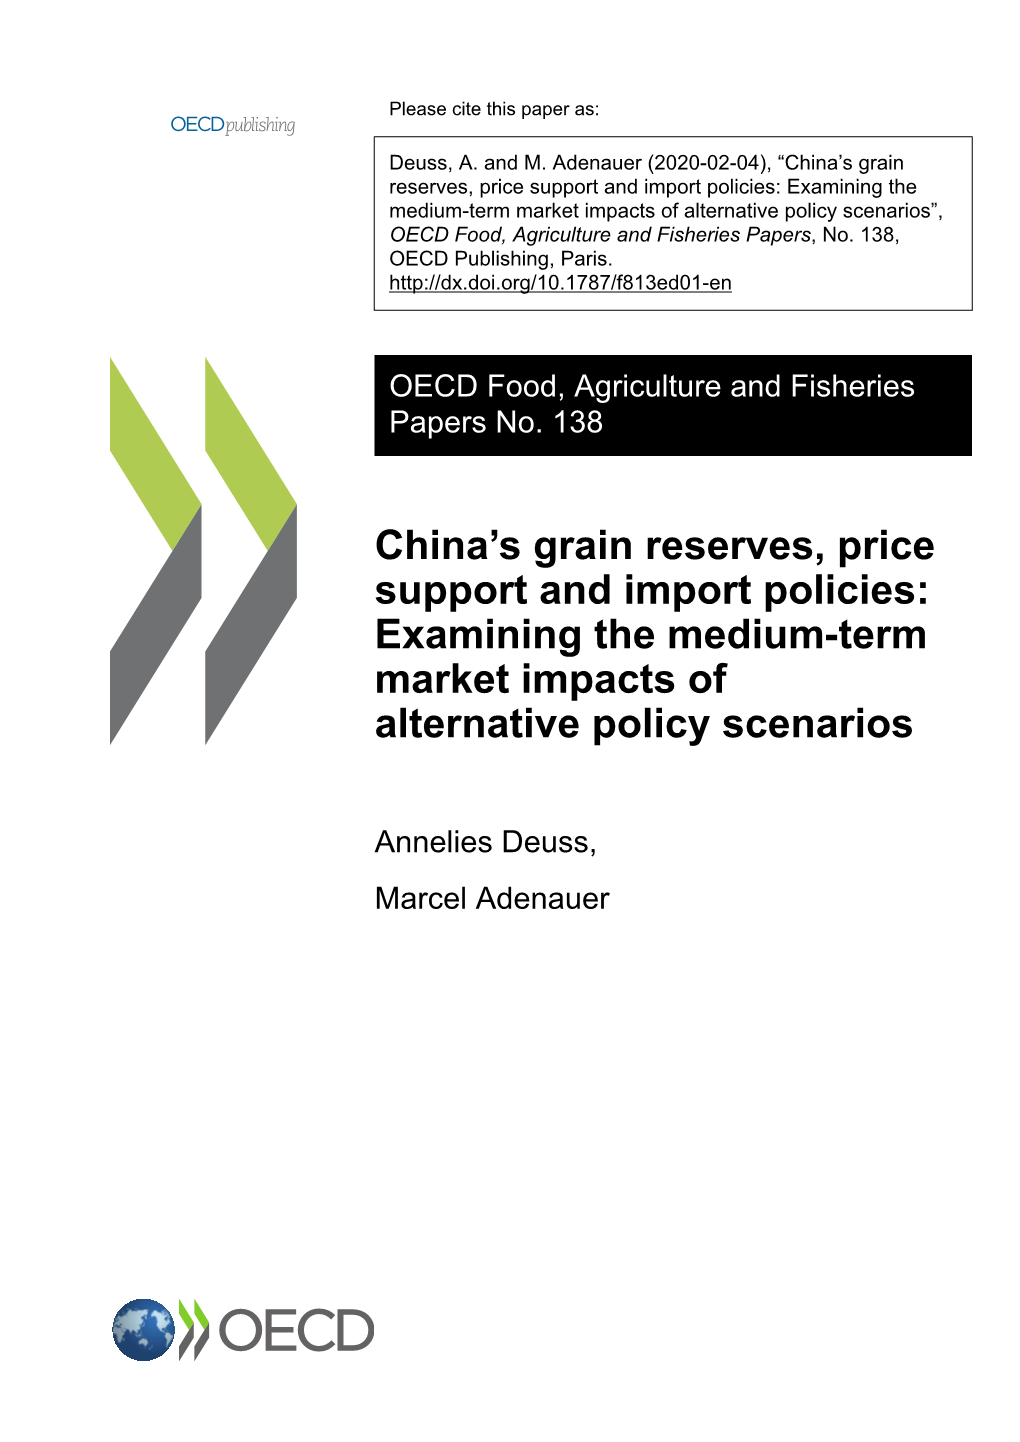 China's Grain Reserves, Price Support and Import Policies